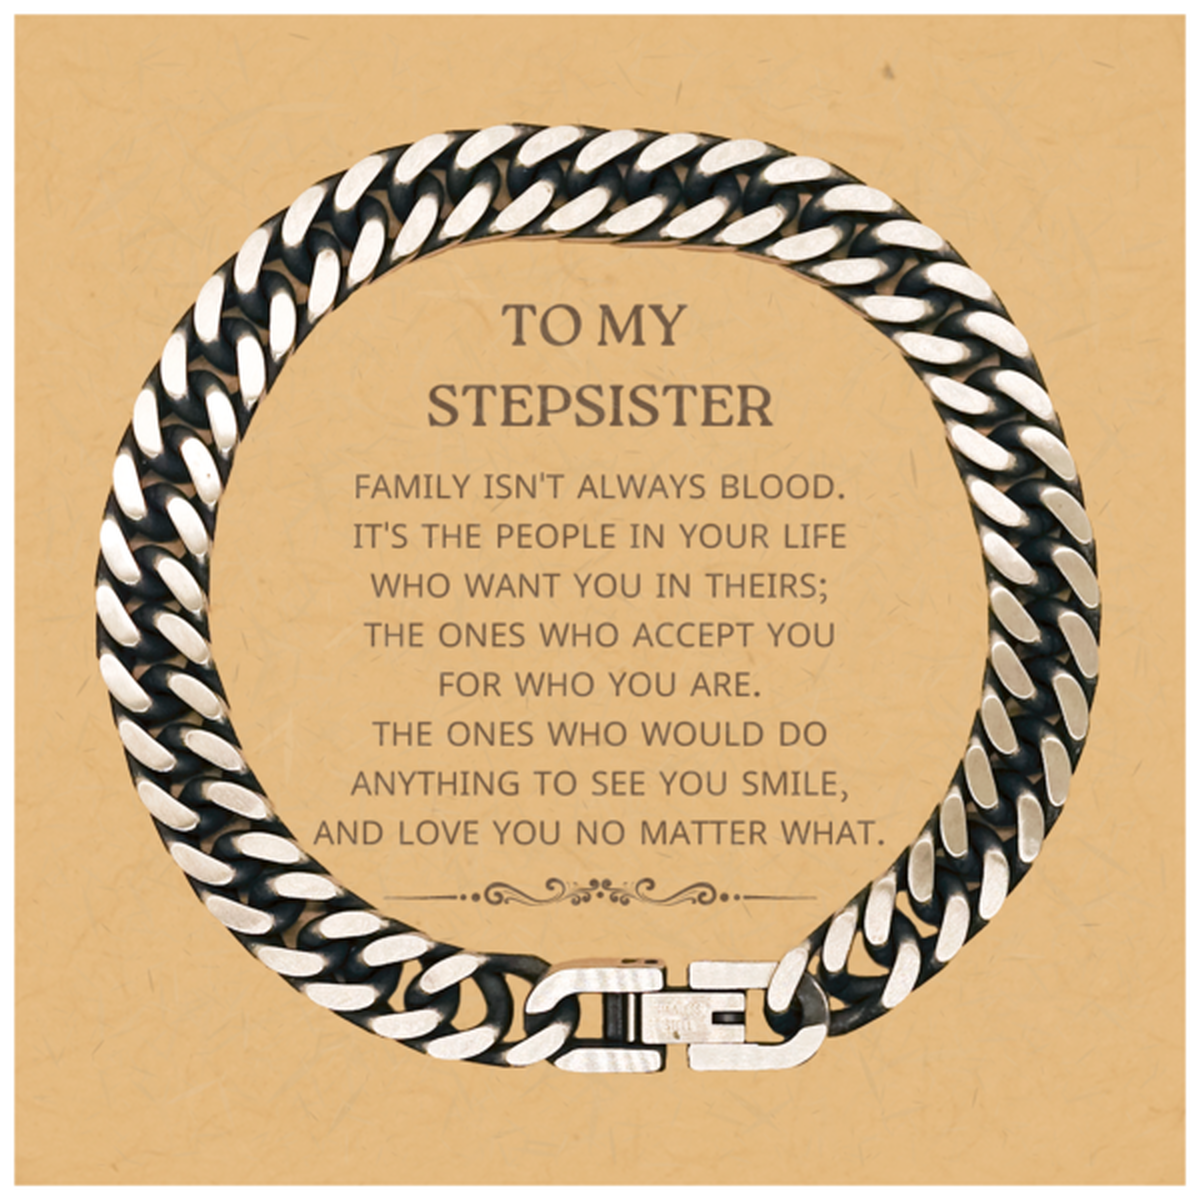 To My Stepsister Gifts, Family isn't always blood, Stepsister Cuban Link Chain Bracelet, Birthday Christmas Unique Present For Stepsister